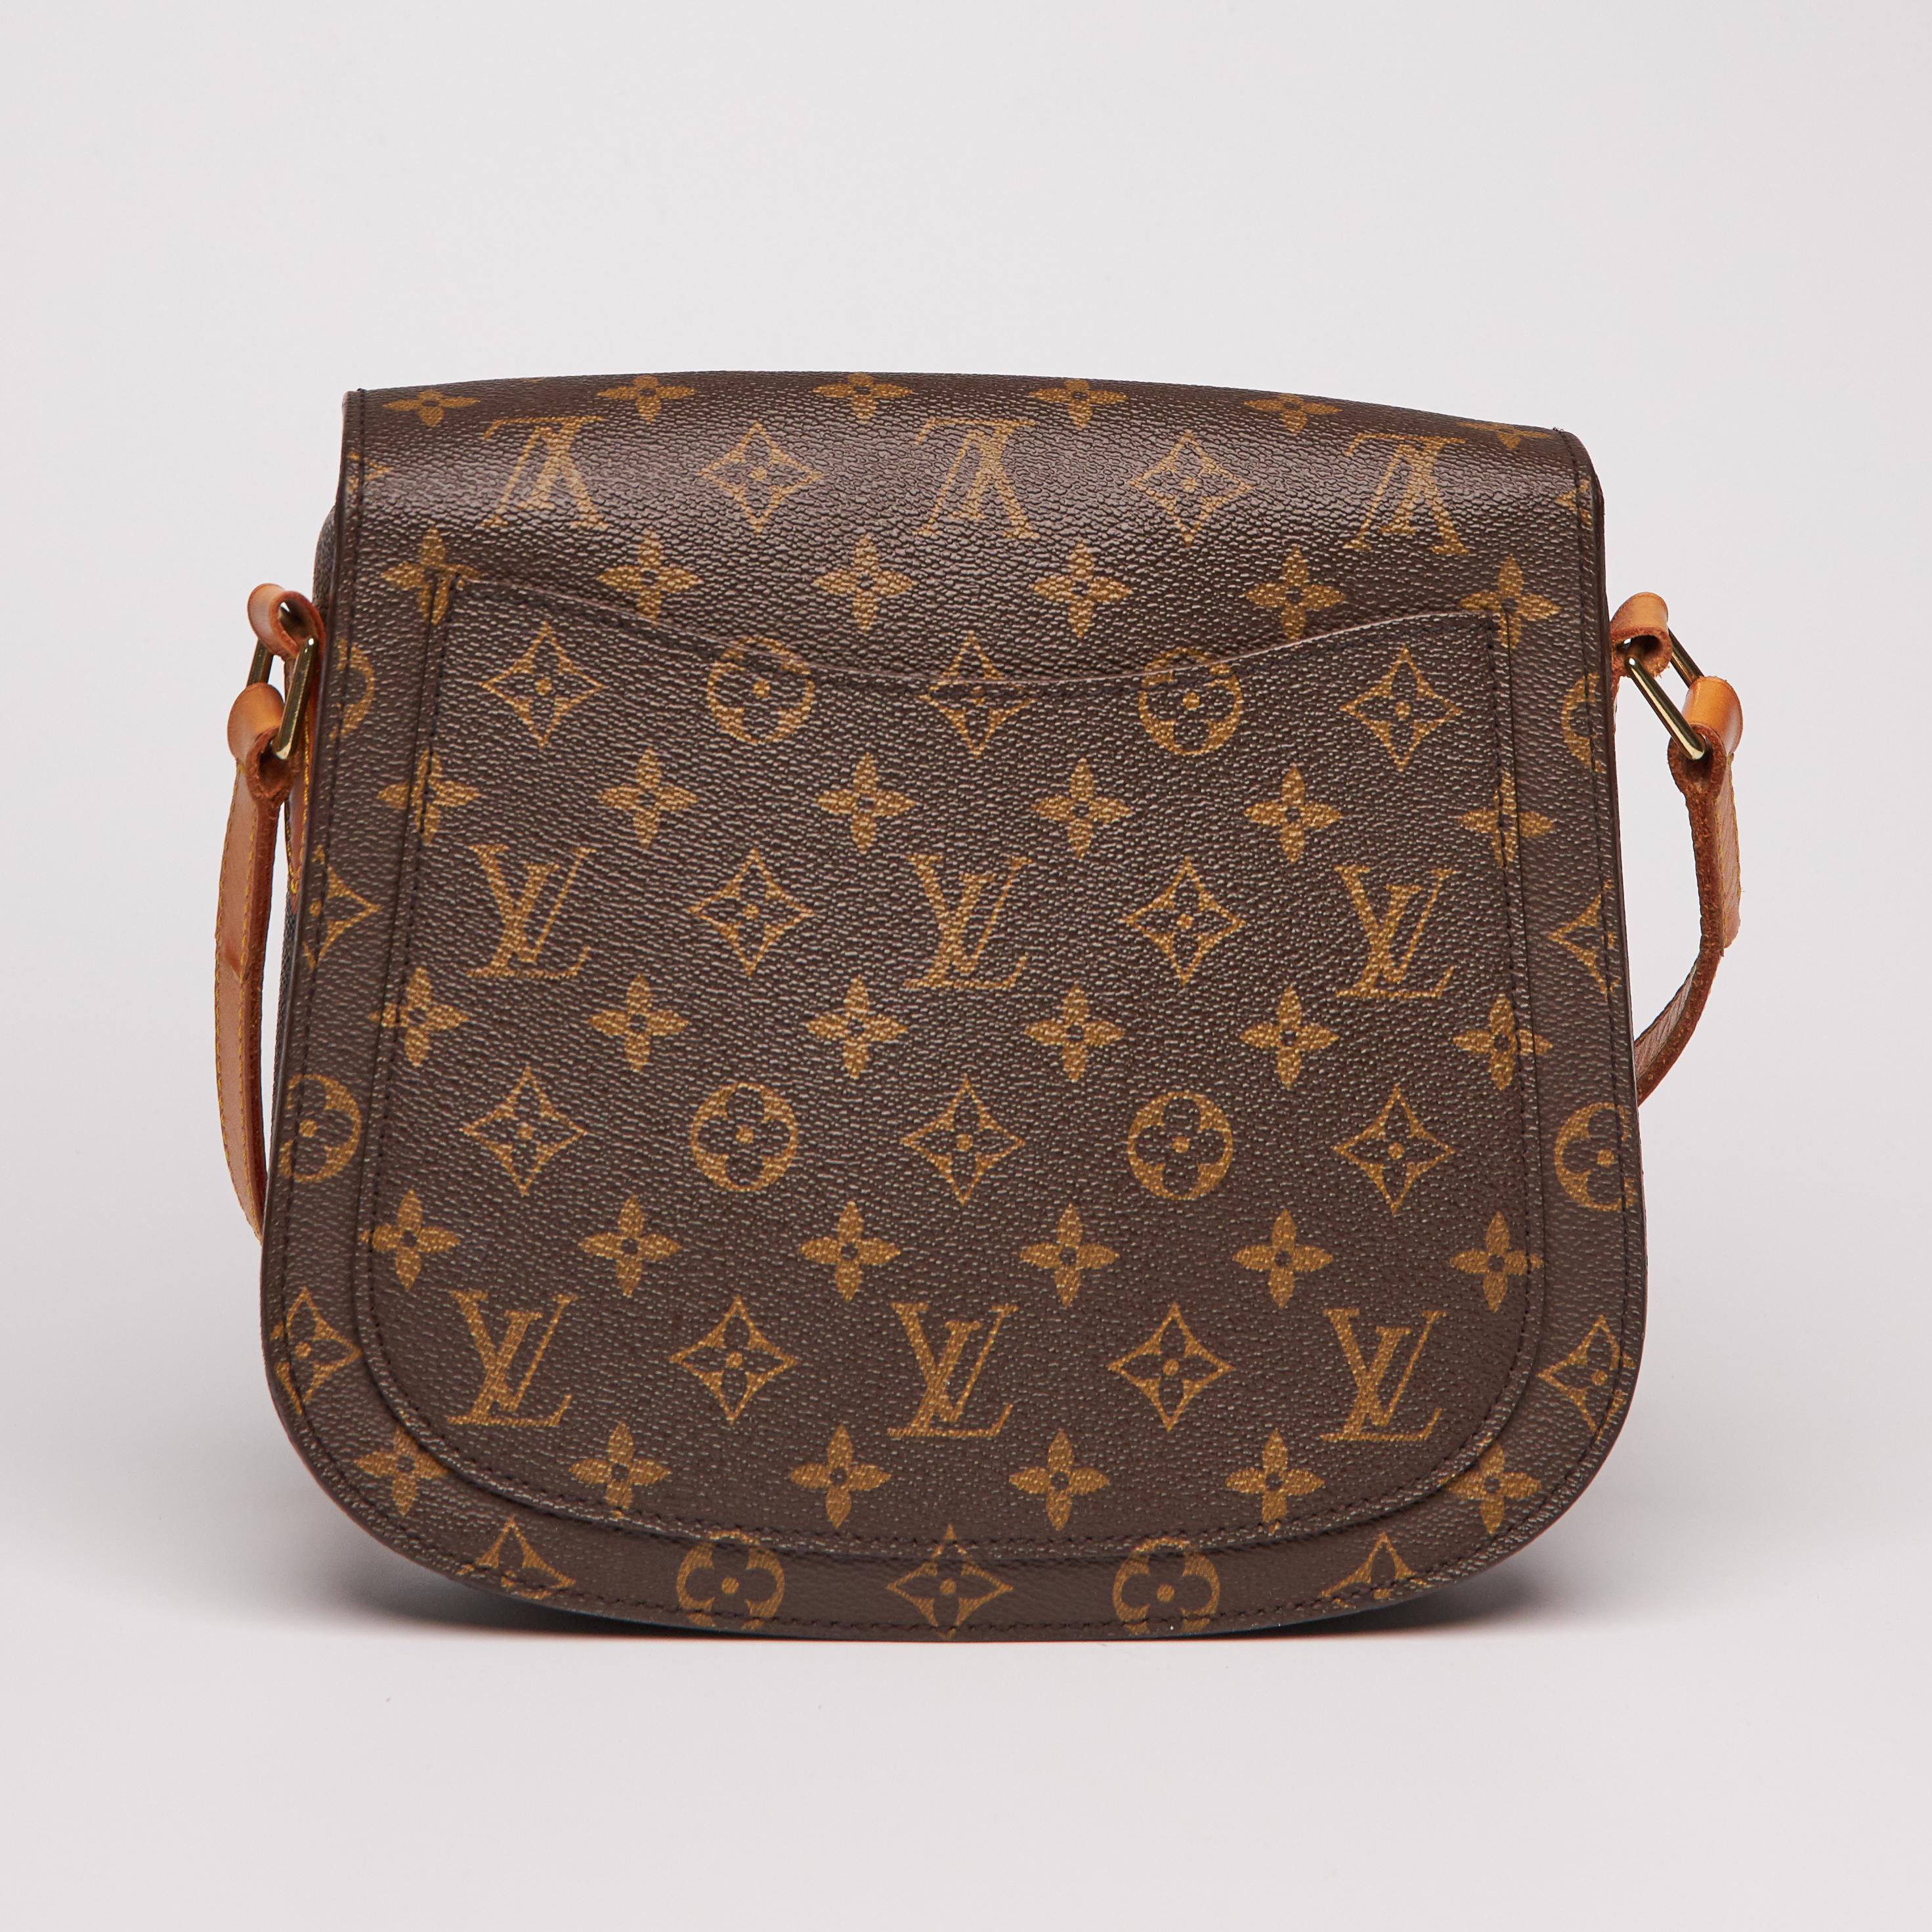 
Rare Louis Vuitton Saint Cloud GM bag. Named after a district in NW Paris, this adorable bag is no longer being made so it has quickly become an item for LV collectors.

The stylish shoulder bag is small with a unique and very distinctive structure